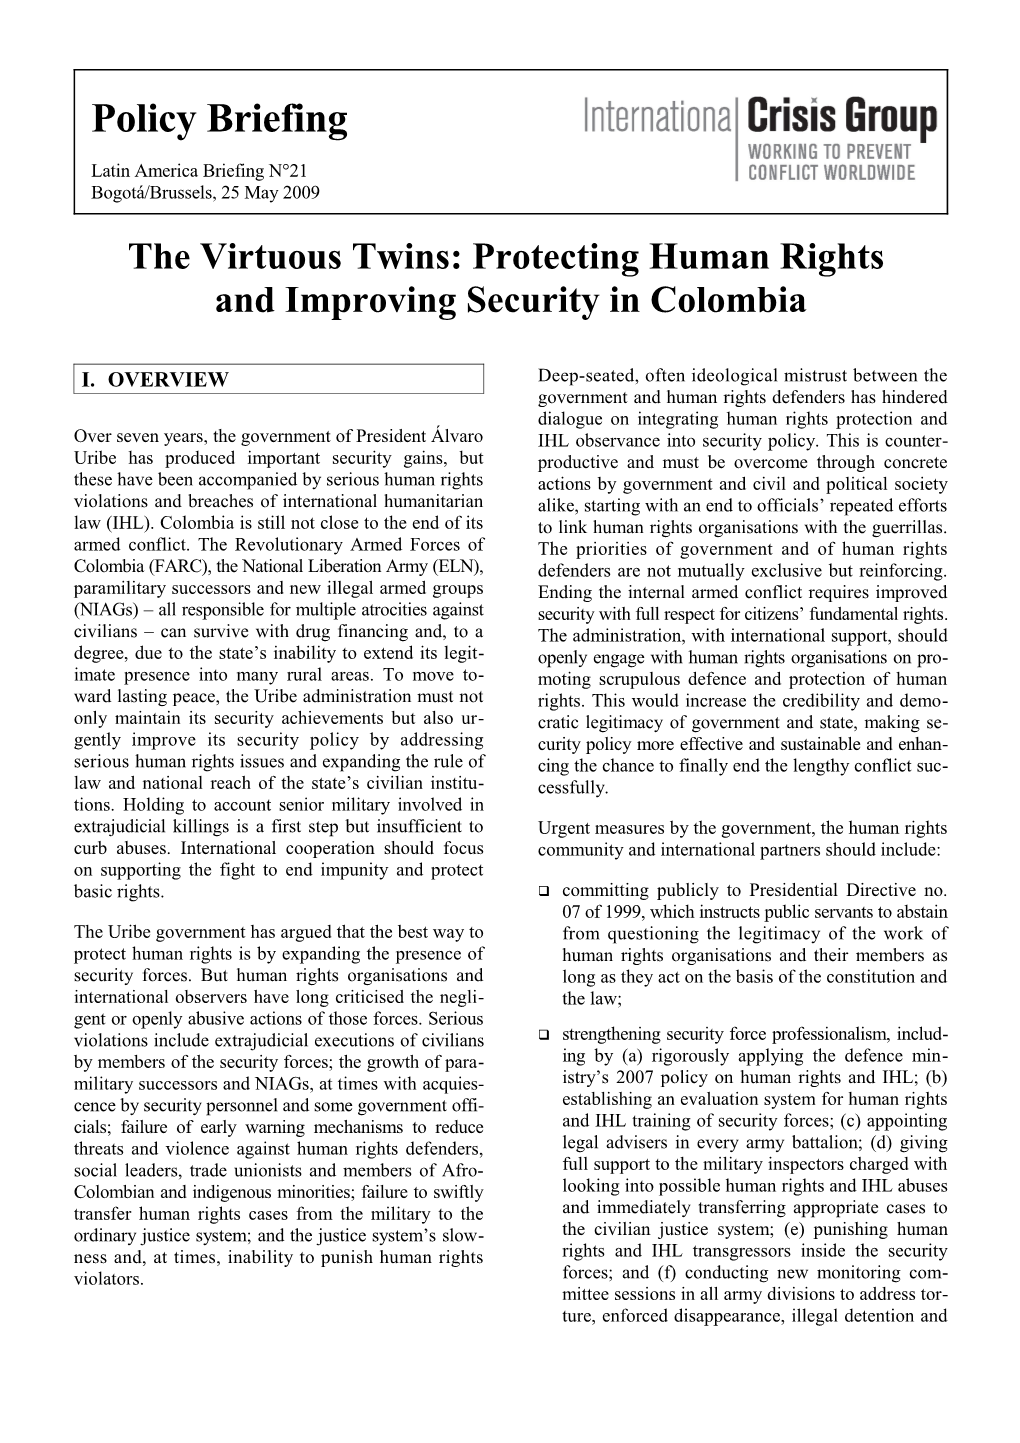 The Virtuous Twins: Protecting Human Rights and Improving Security in Colombia